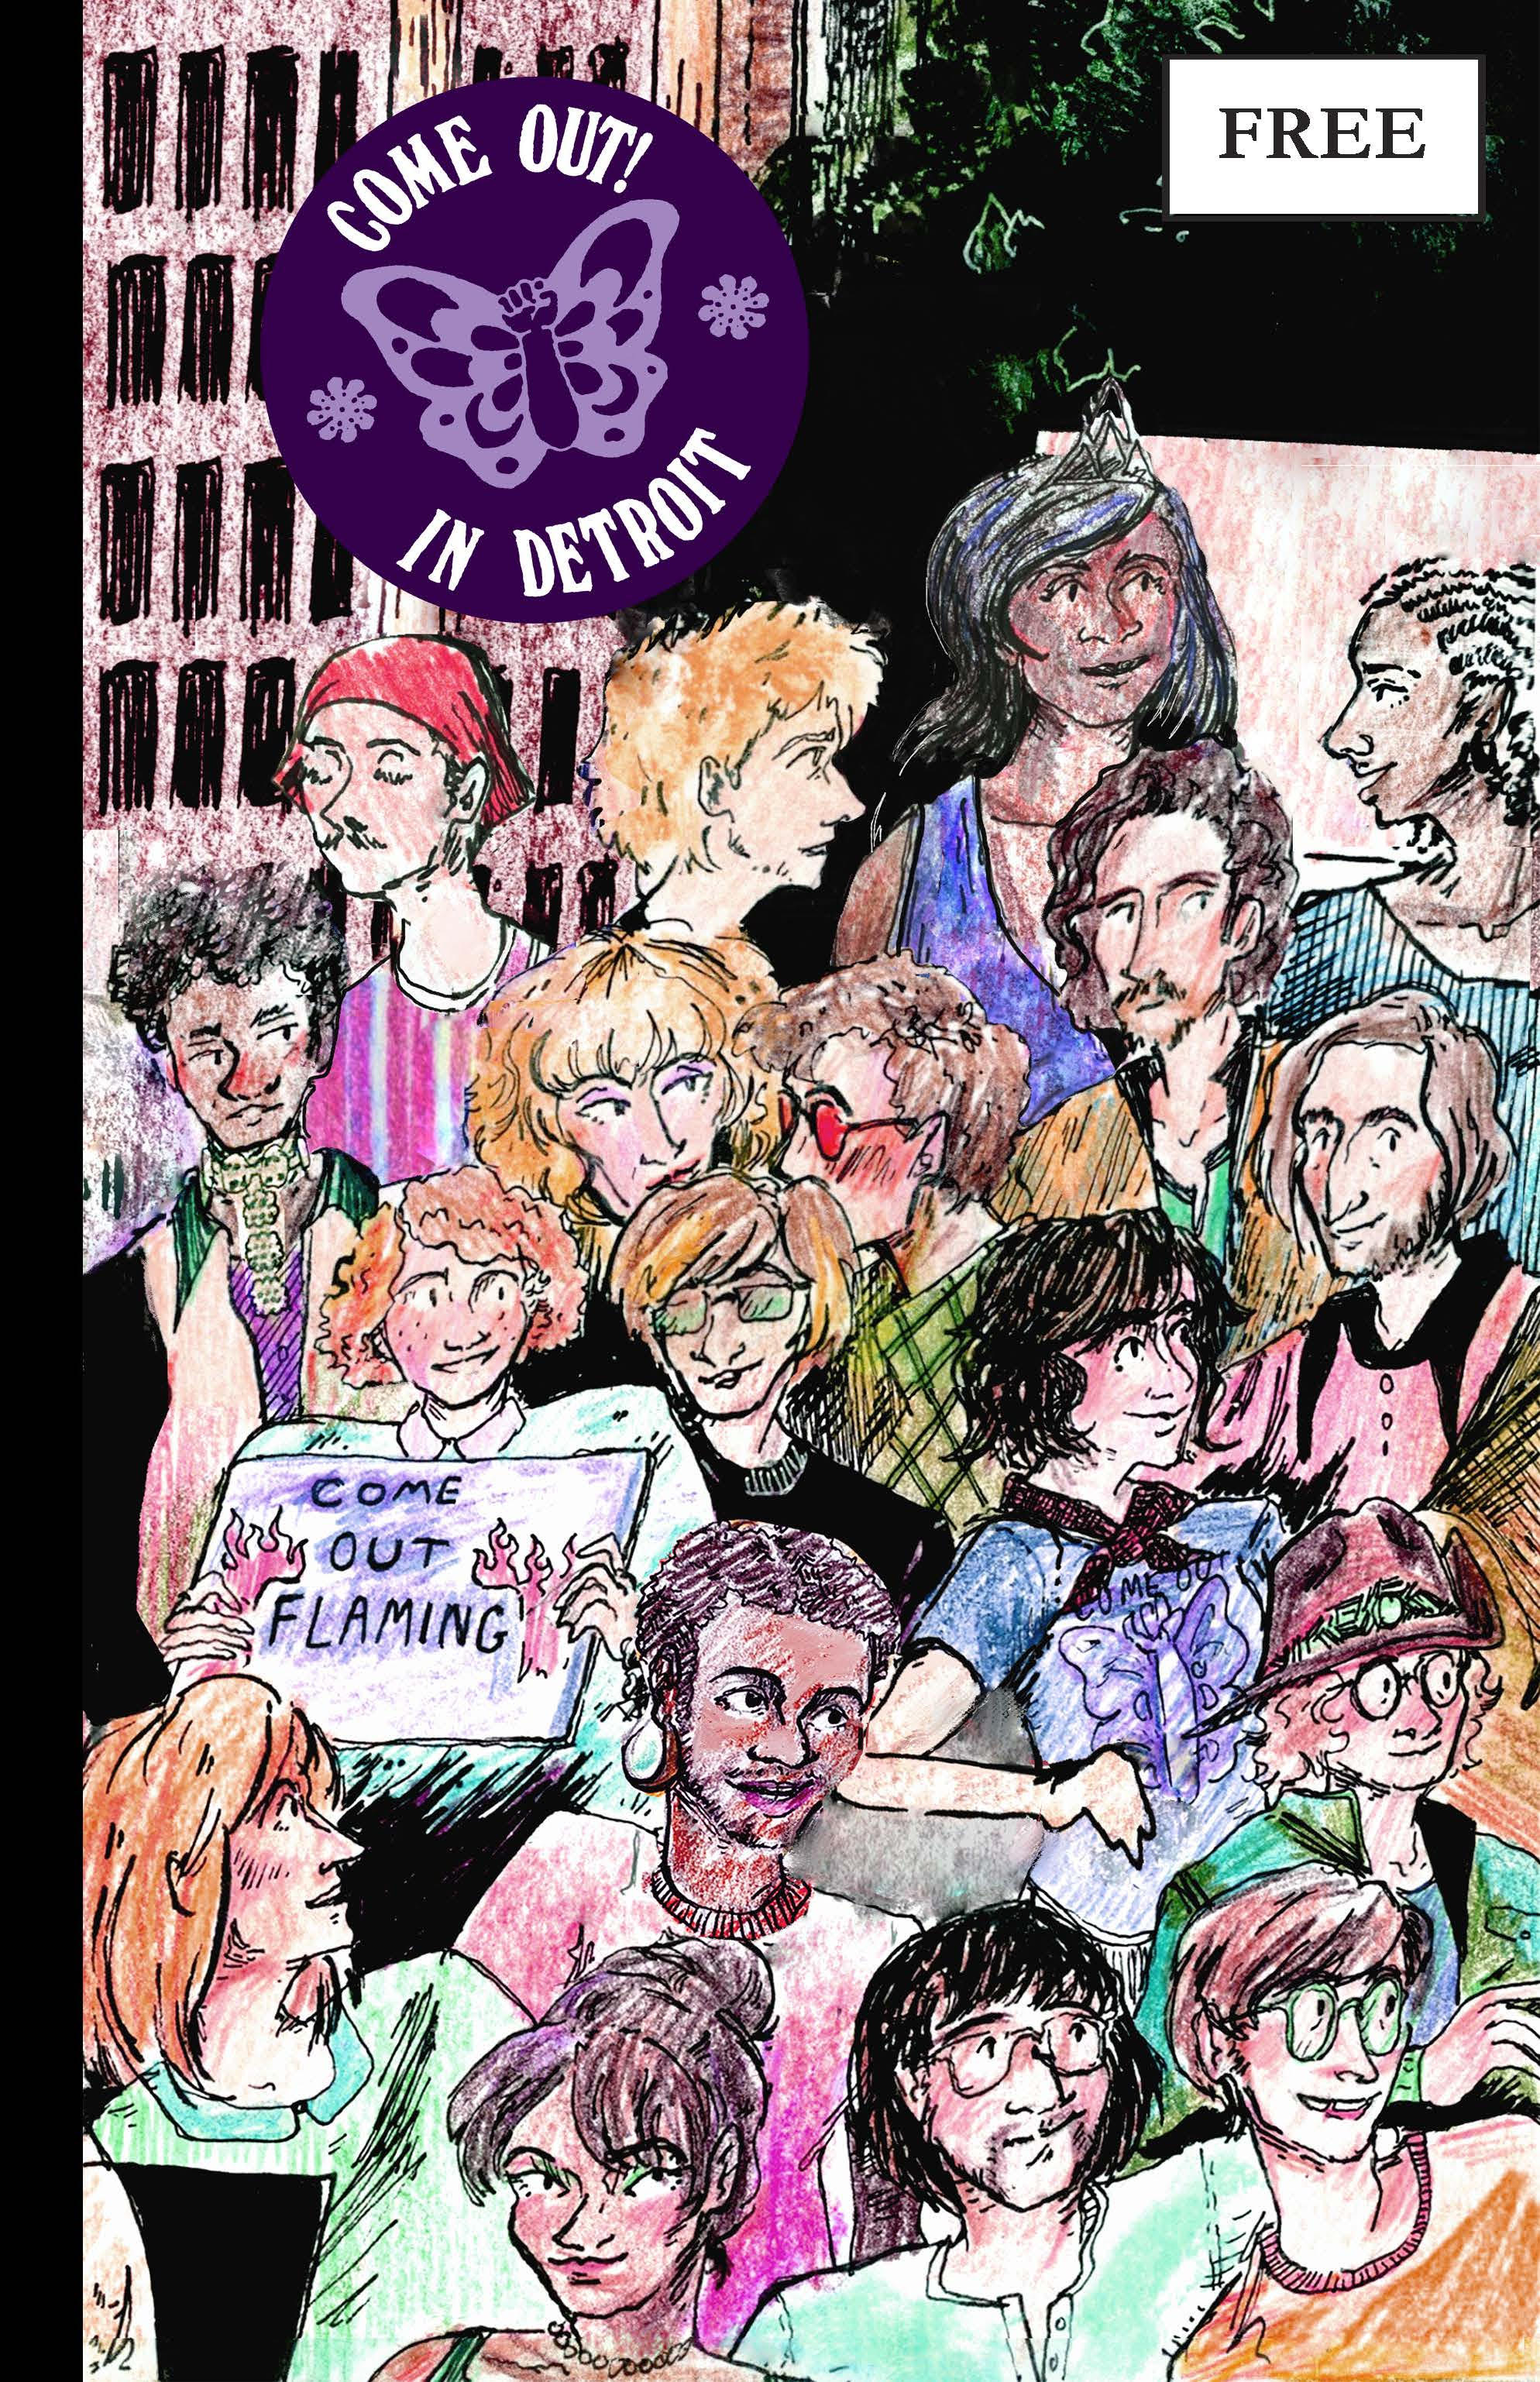 The cover of the comic Come Out! In Detroit. The title in a purple circle and featuring a butterfly styled around a raised fist is in the top left corner, and a mark denoting the comic as “Free” for Free Comic Book Day is at the top right. The illustration depicts a dozen or so young people in a variety of different clothing, one of whom is holding a sign that says, “Come out flaming.”